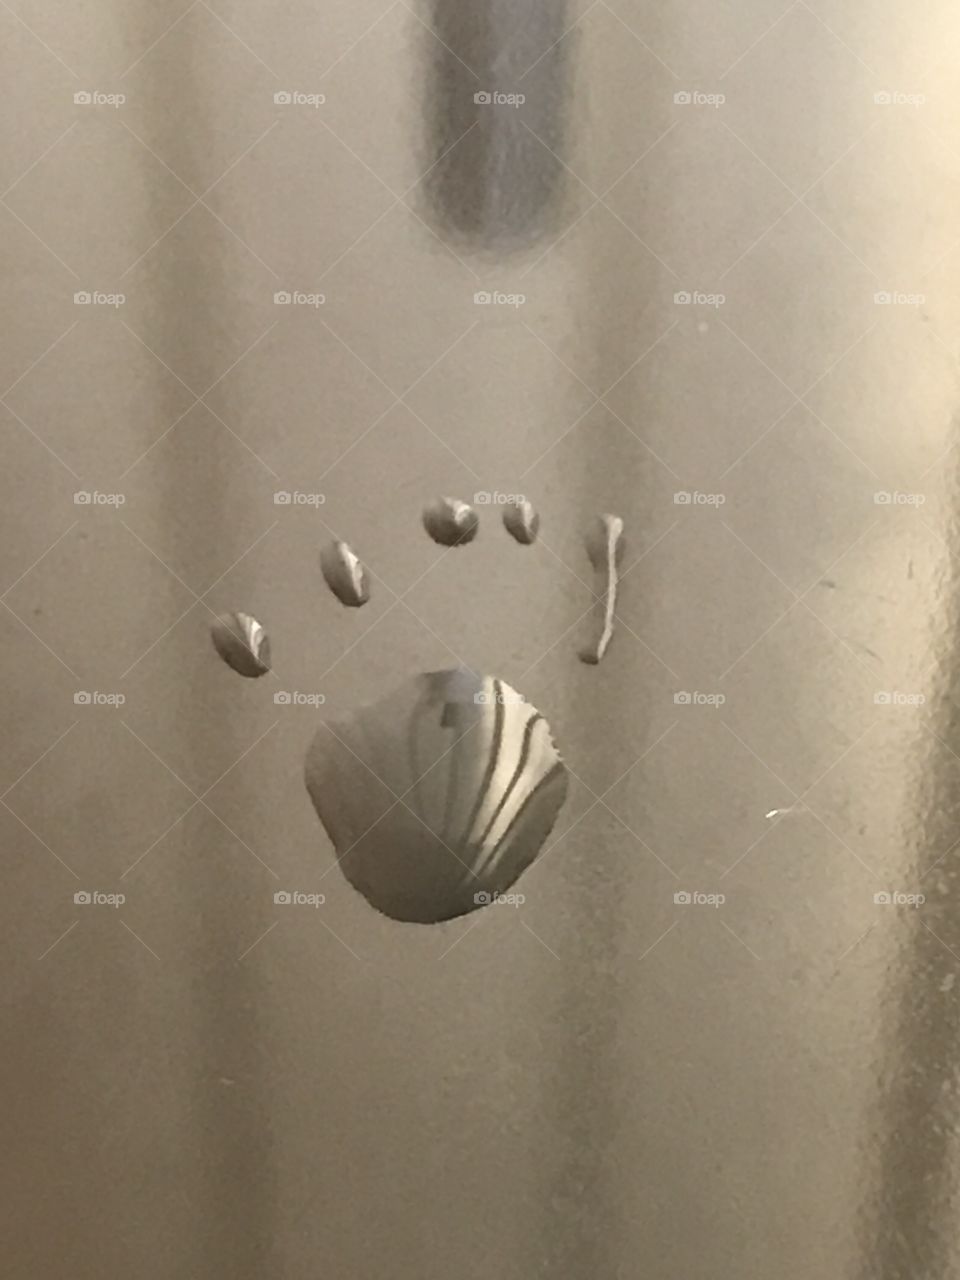 Accidental Paw made out of drops of wAter 